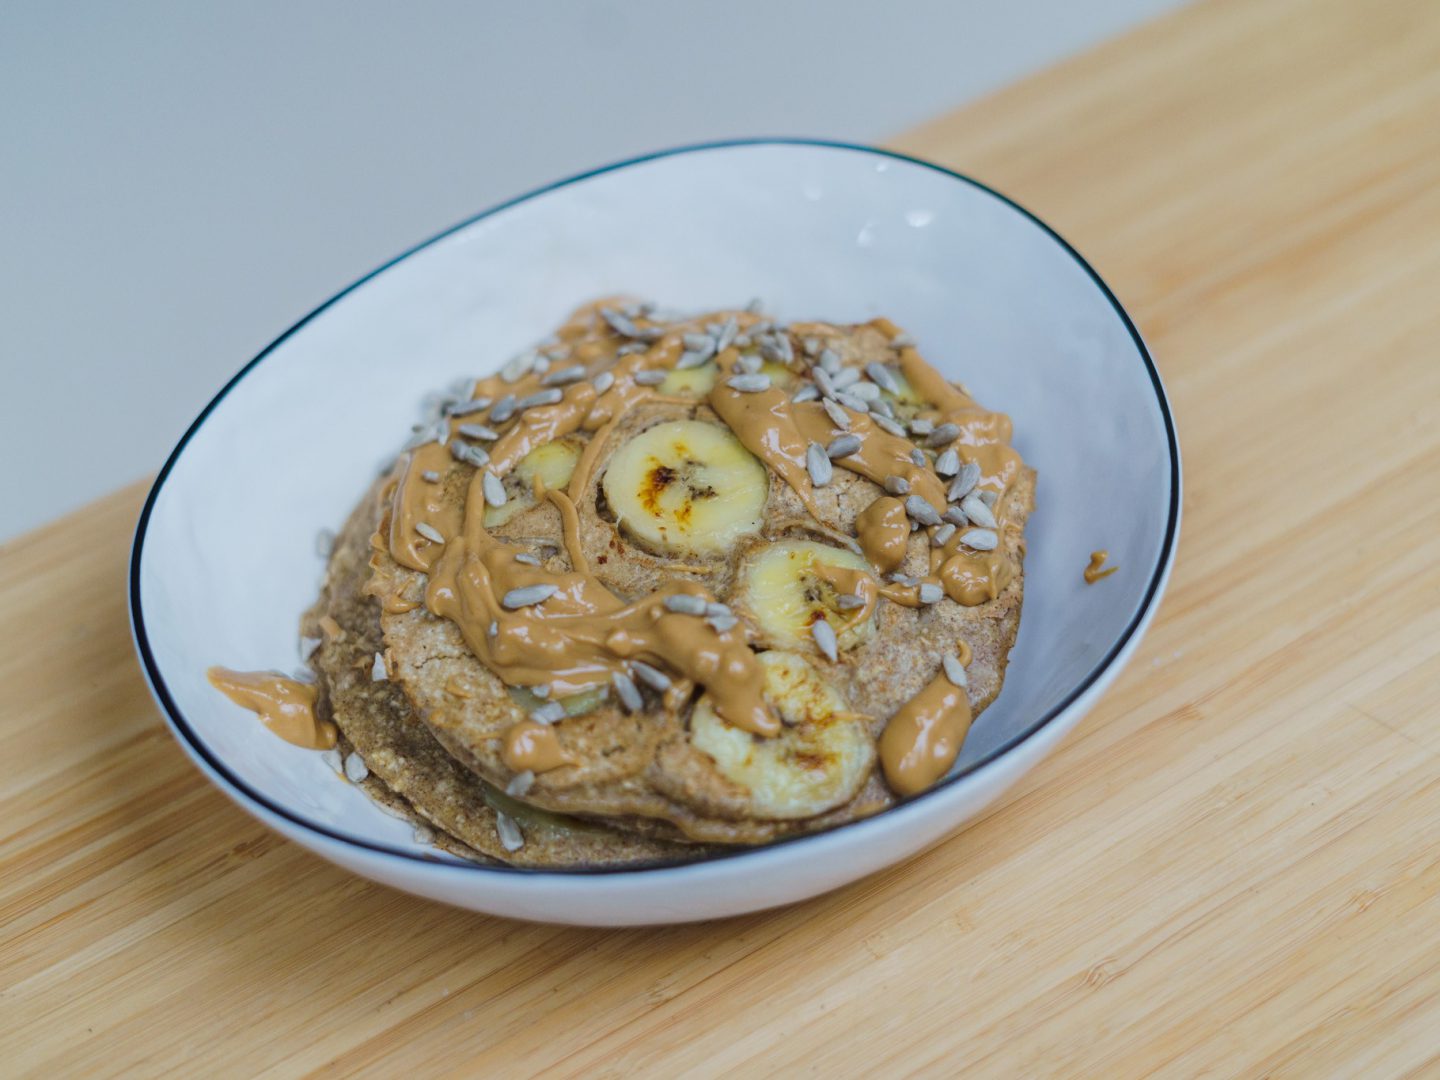 Bowl with banana pancakes topped with seeds, banana slices and peanut butter